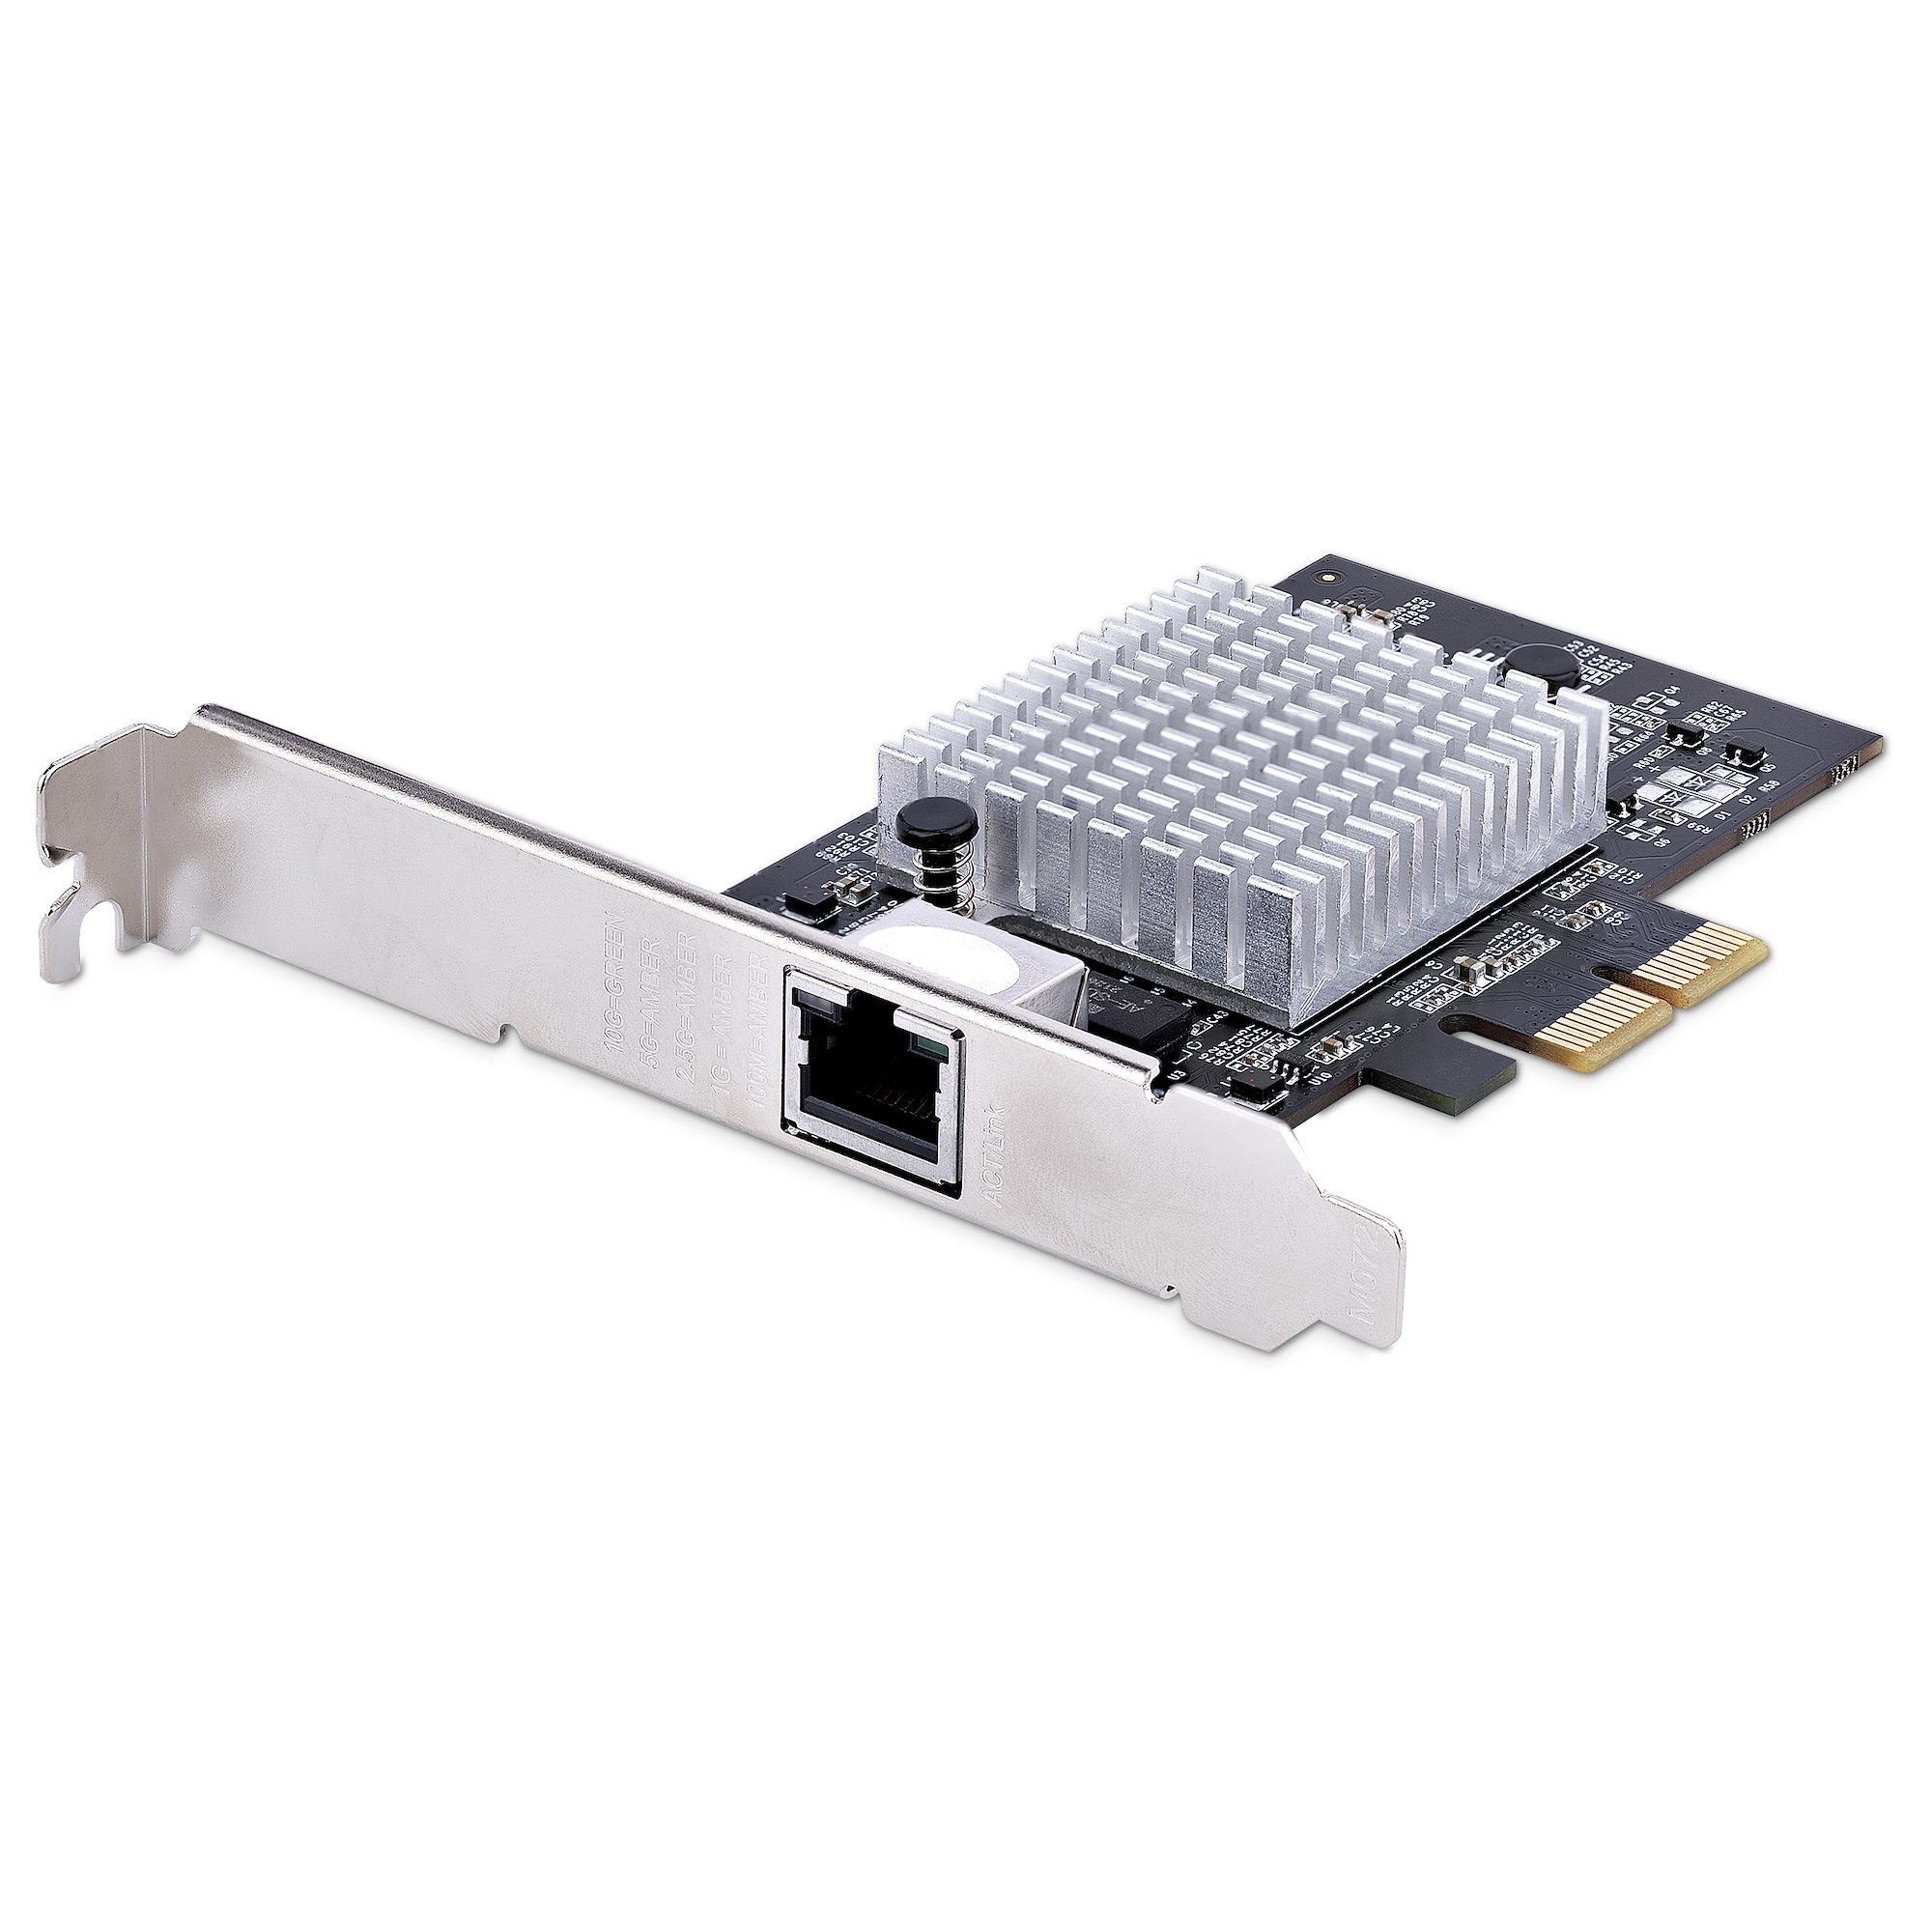 【ST10GSPEXNB2】10G PCIE NETWORK ADAPTER CARD